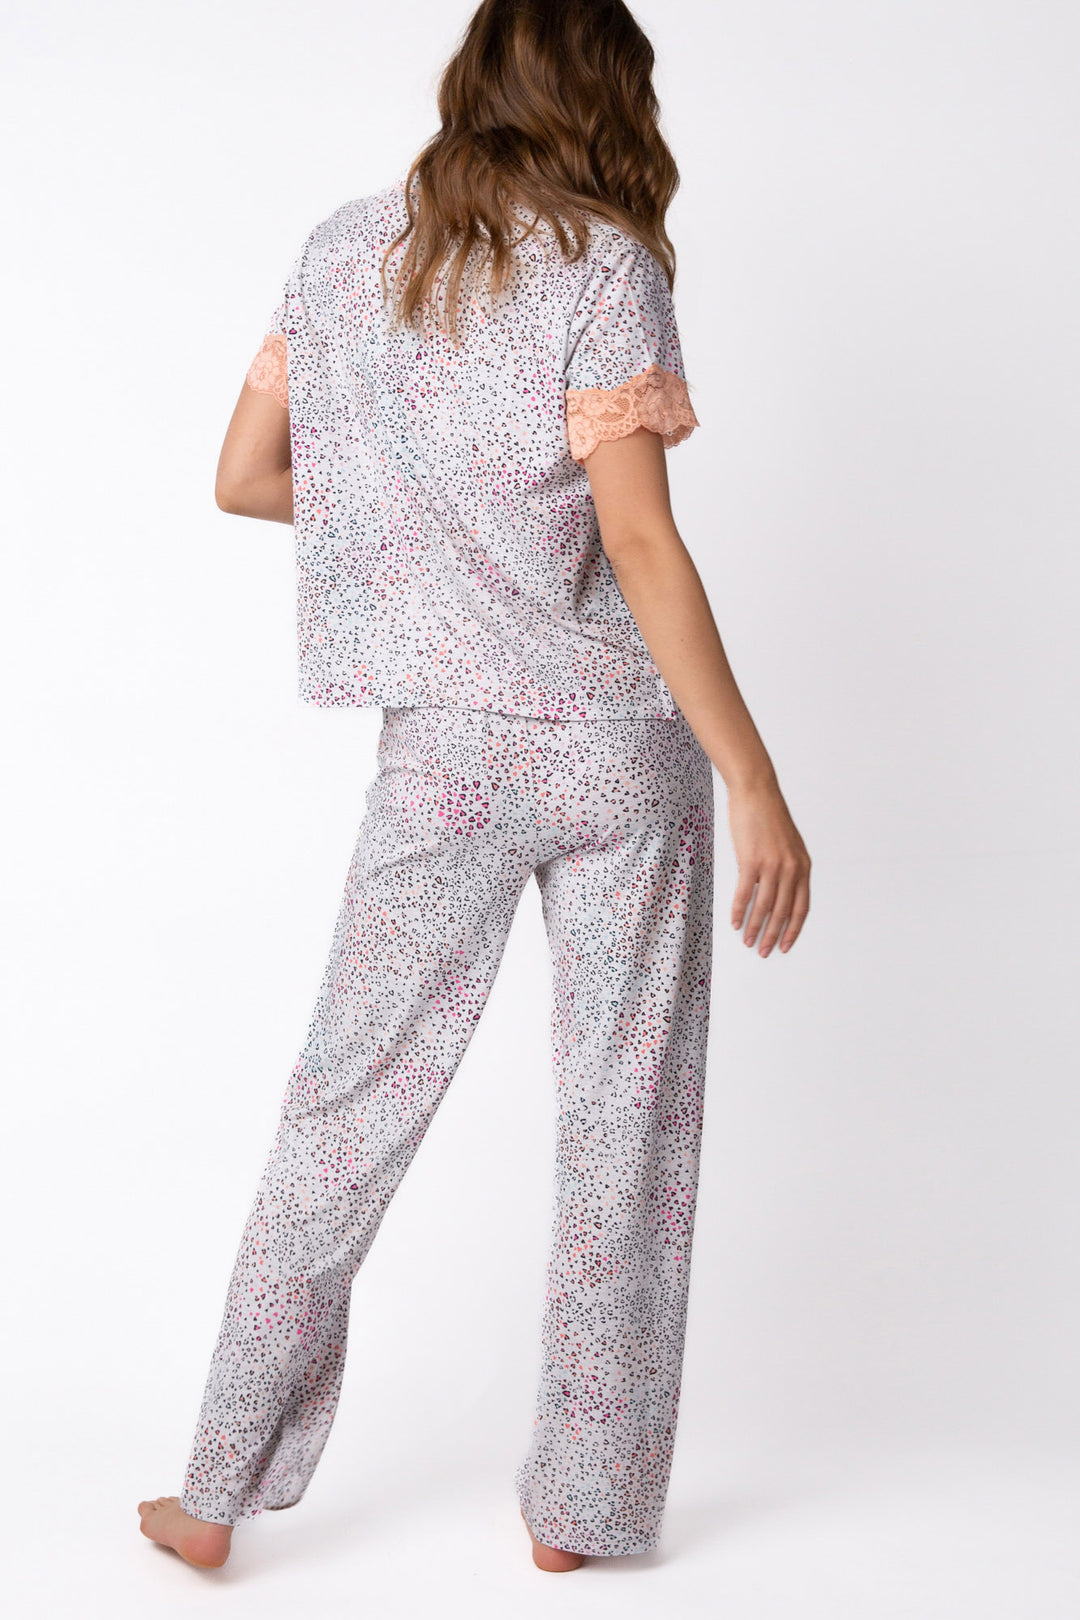 Mini heart-print ivory modal pajama set top with lace-trimmed sleeves & ties at waist.